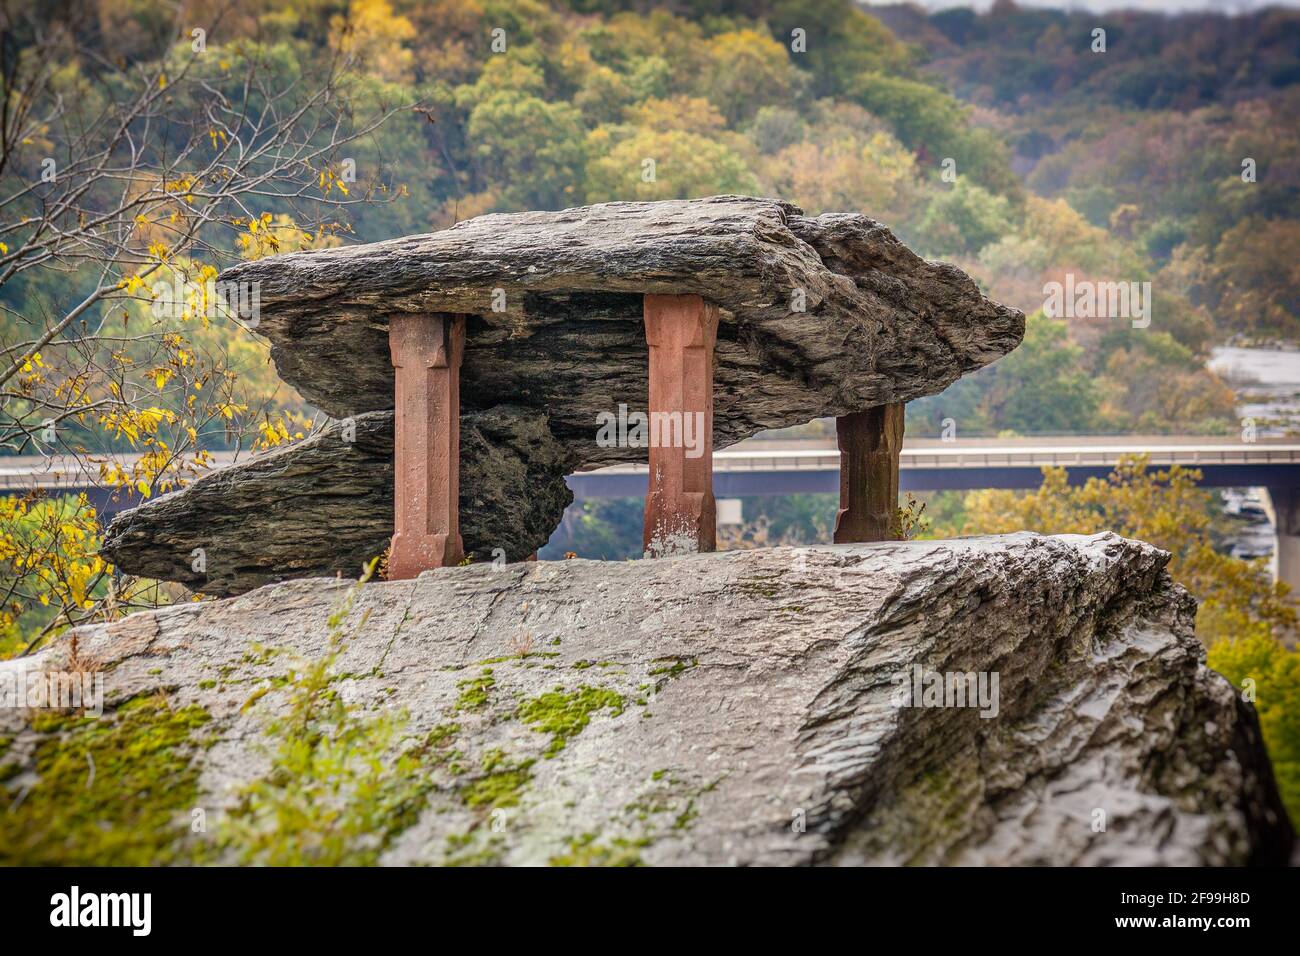 Jefferson Rock in Harpers Ferry National Historical Park, West Virginia Stock Photo